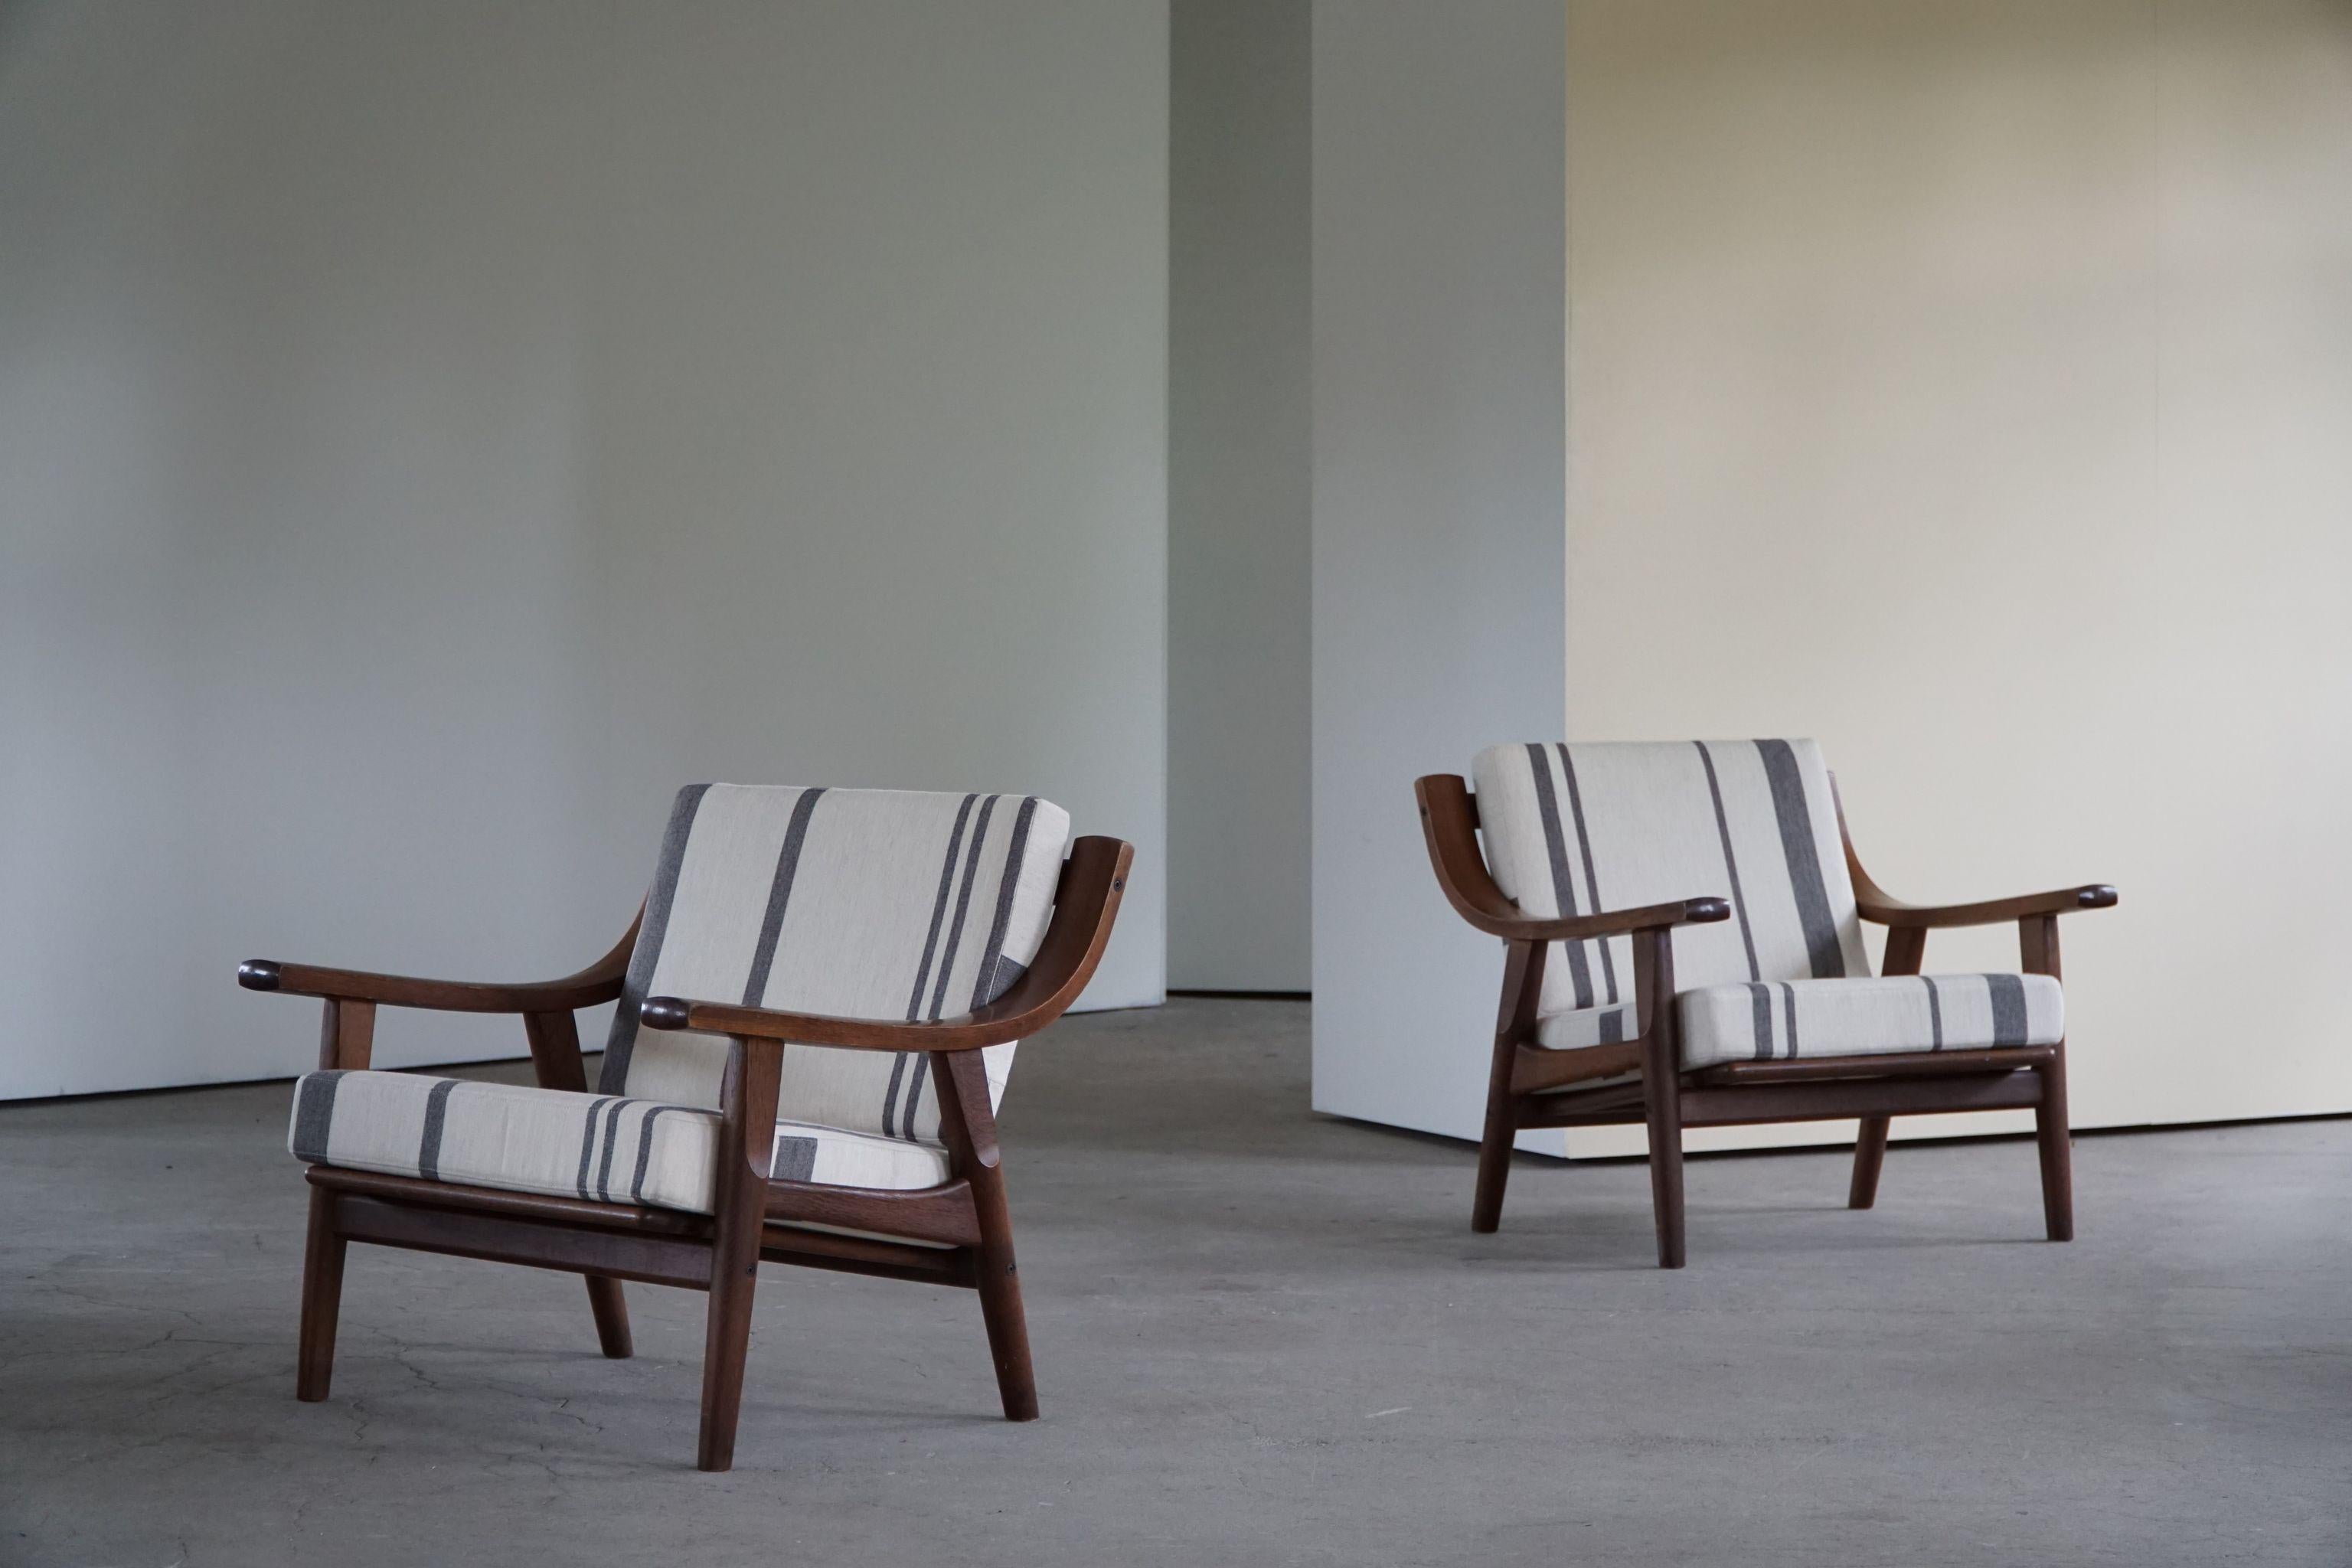 A fine pair of lounge chairs in solid dark stained oak, reupholstered cushions in great quality striped savak wool. Designed by Hans J. Wegner for Getama, model 